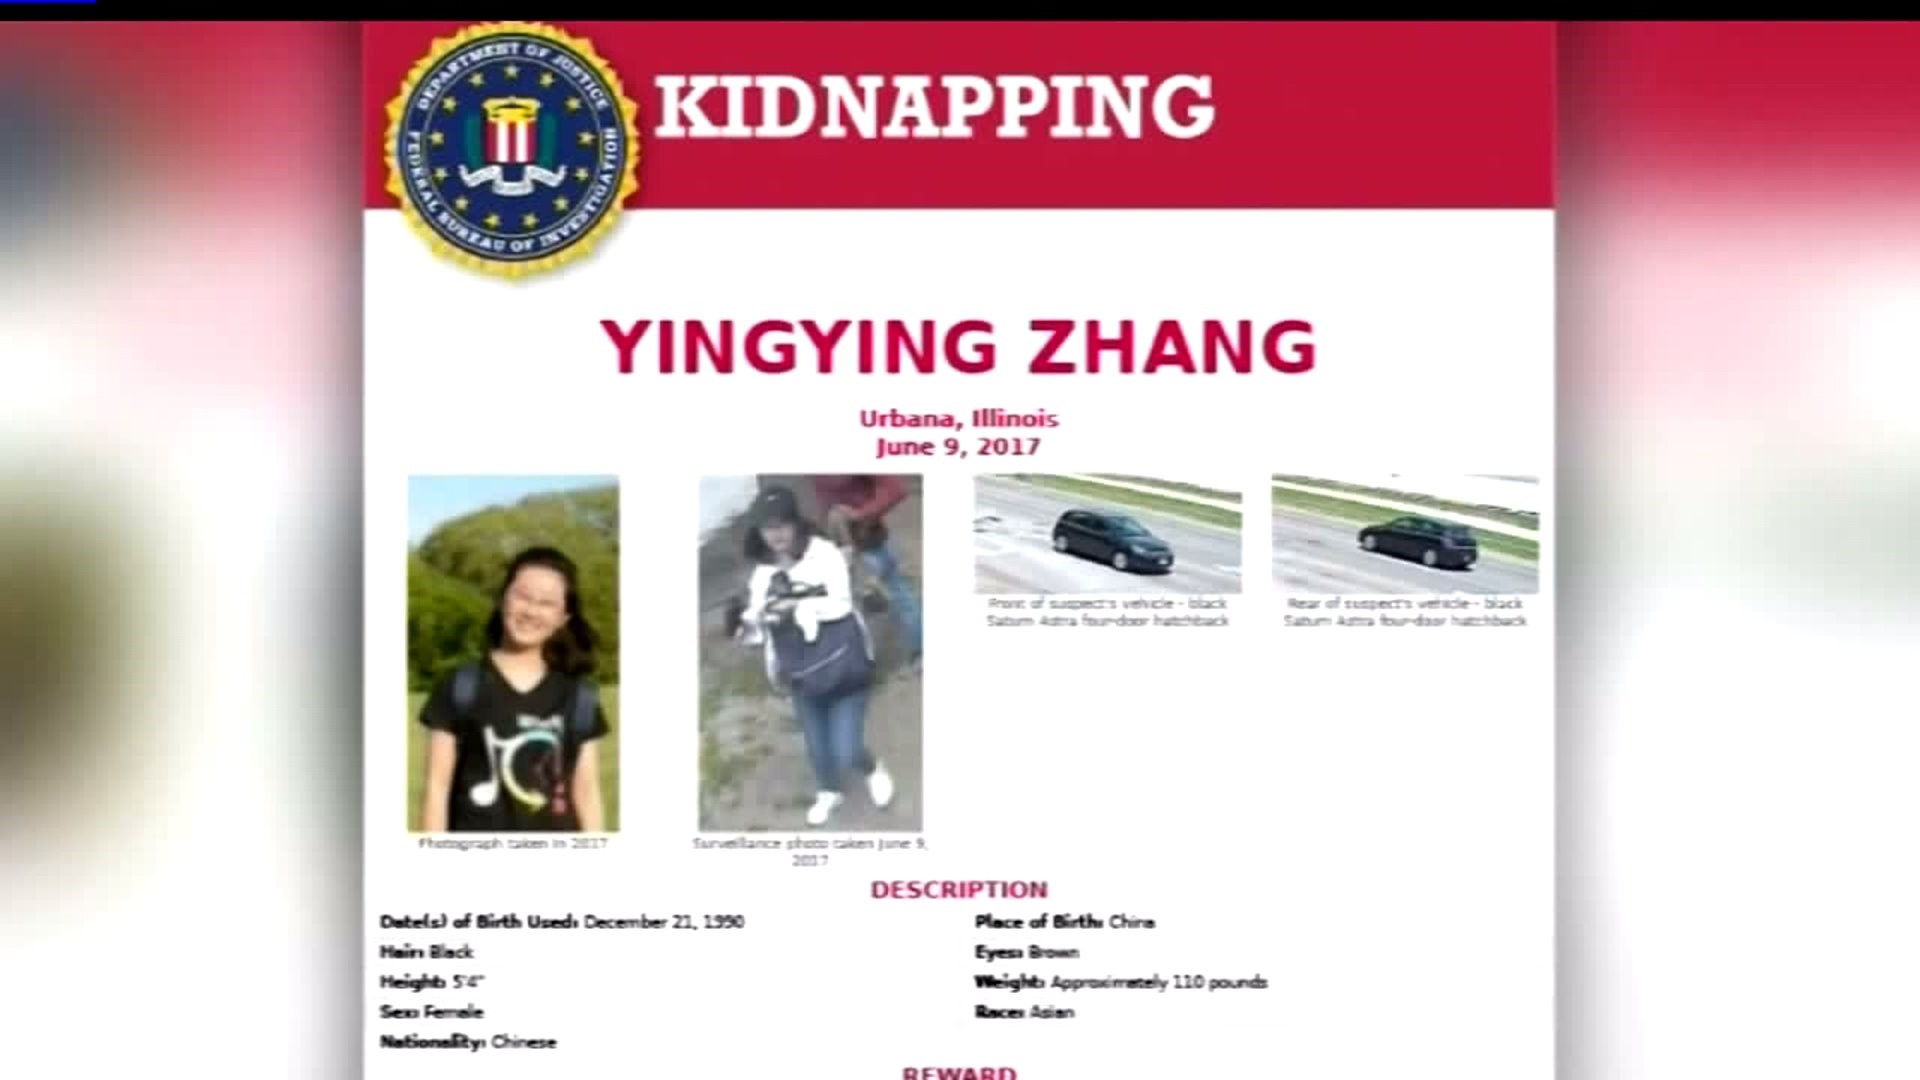 F.B.I. says kidnapping case is now a "national priority"